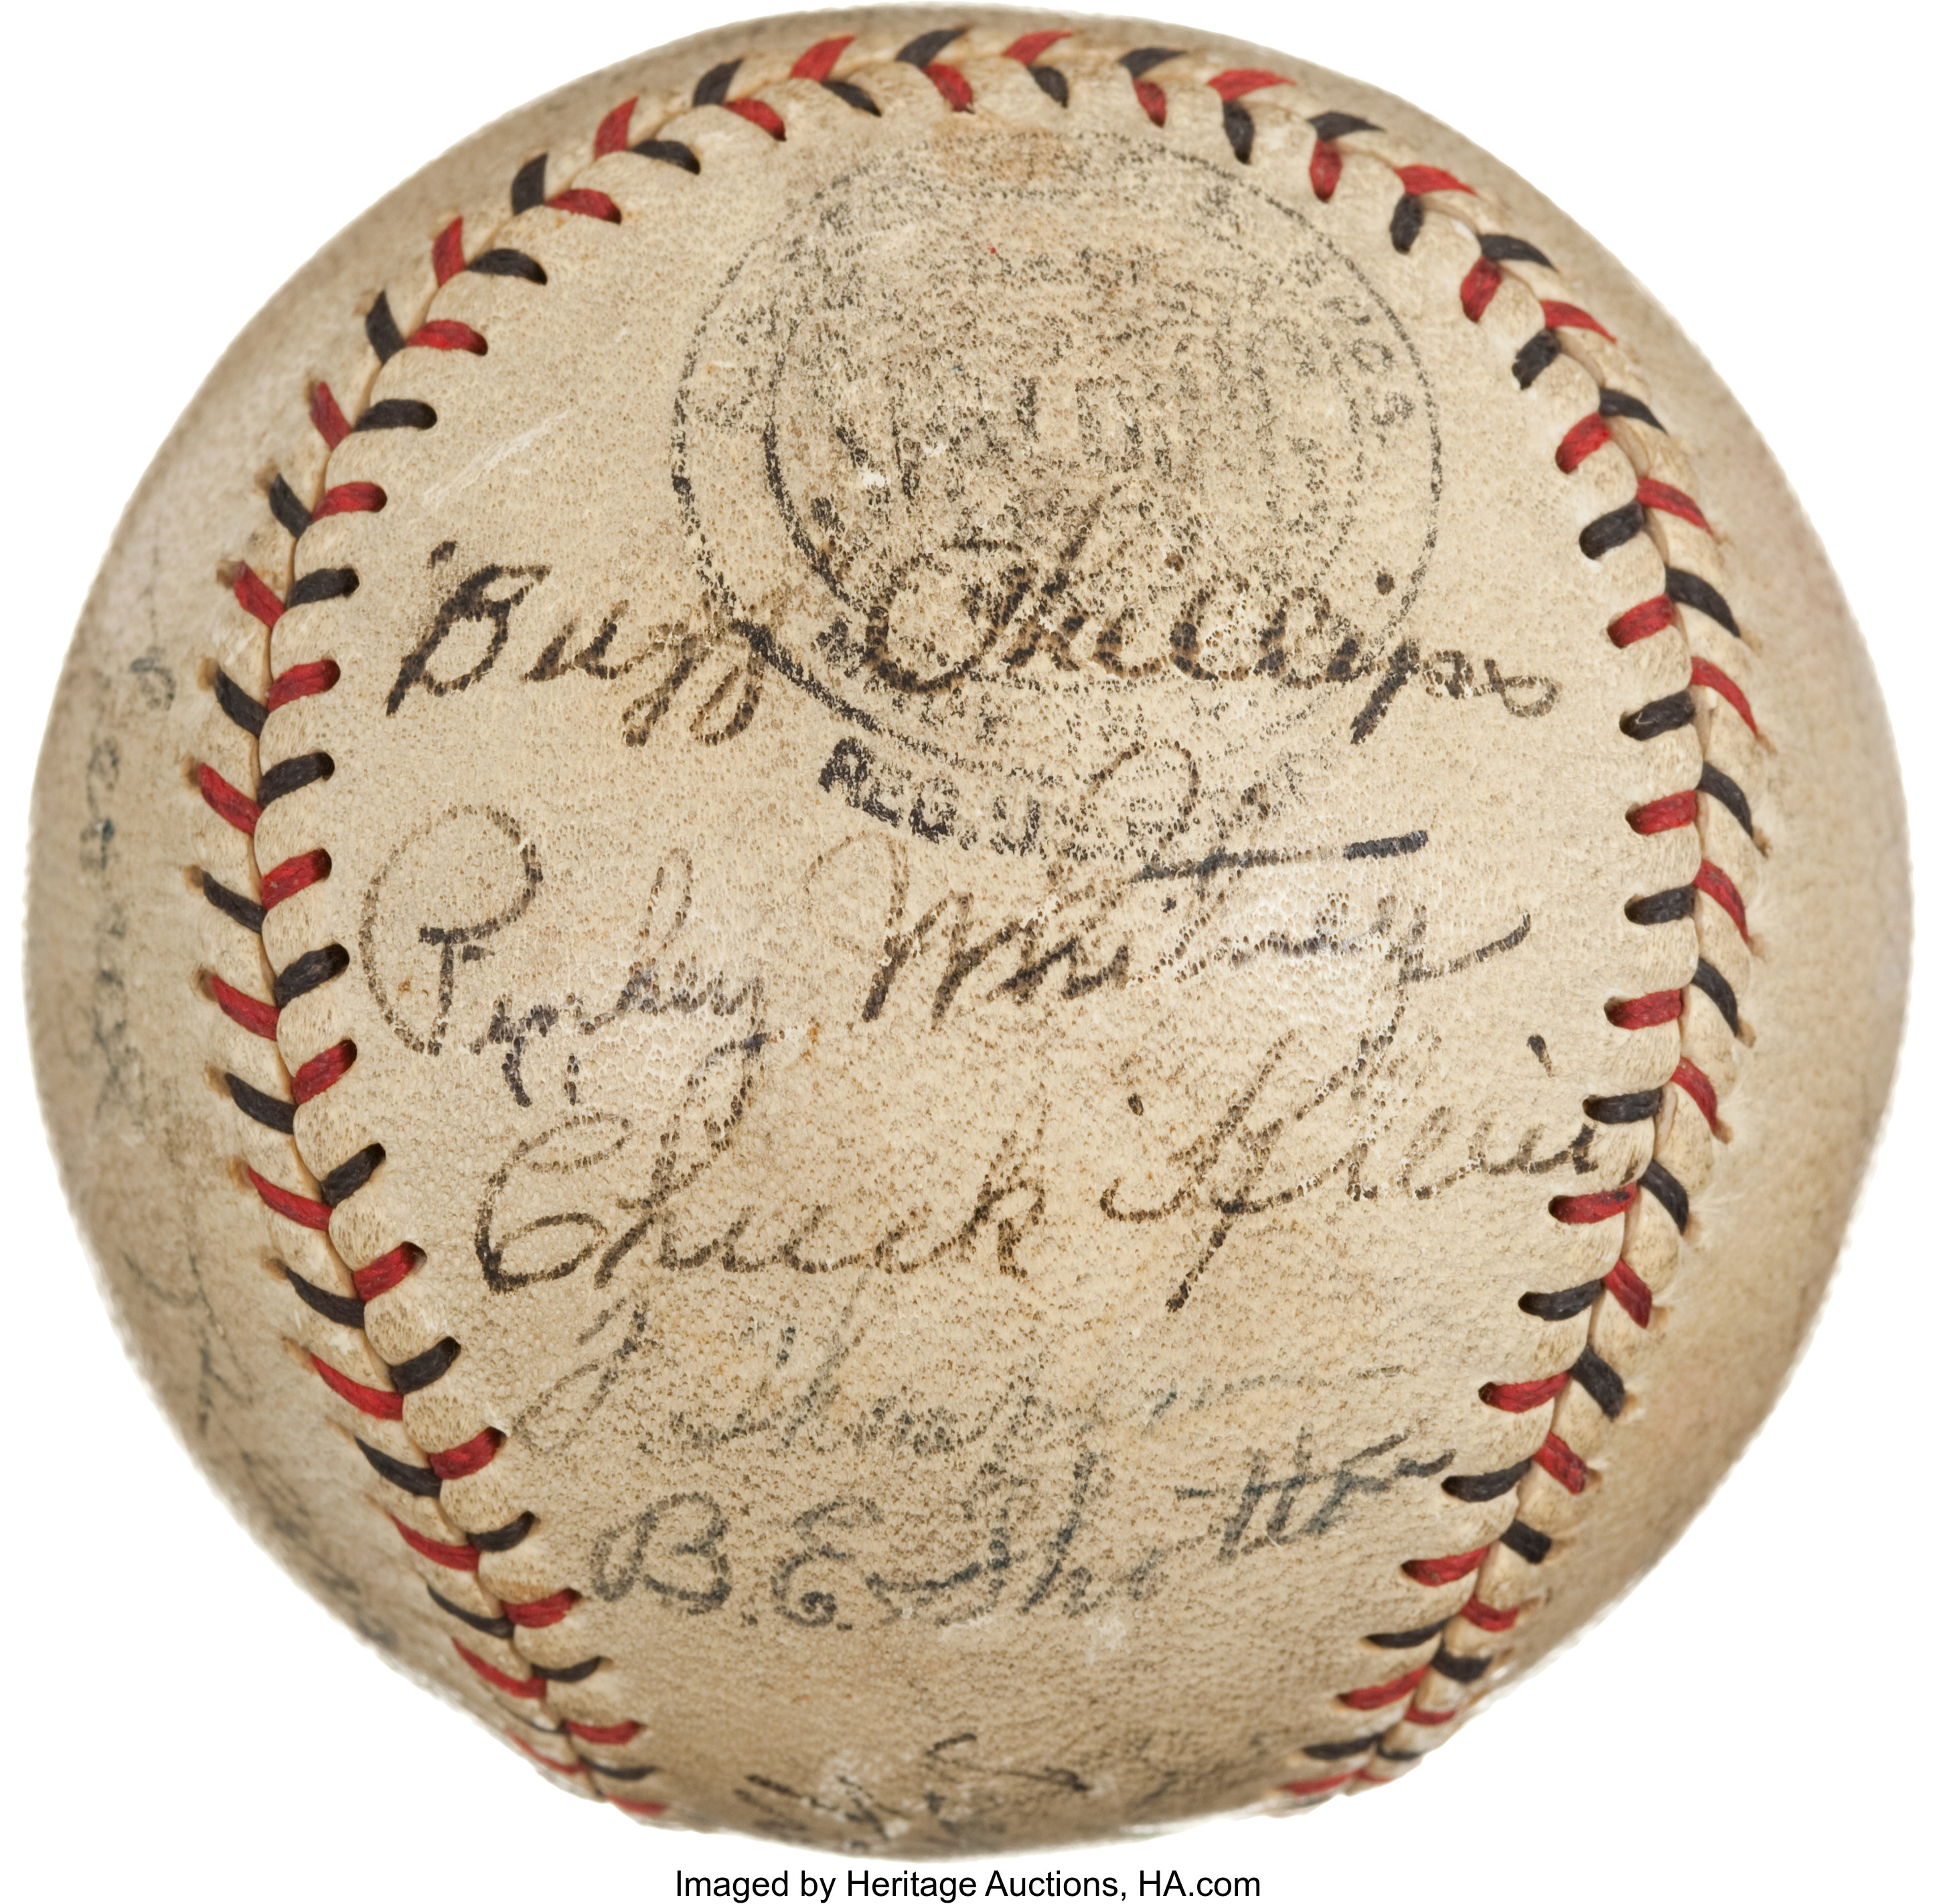 1930 Philadelphia Phillies Partial Team Signed Baseball with Chuck